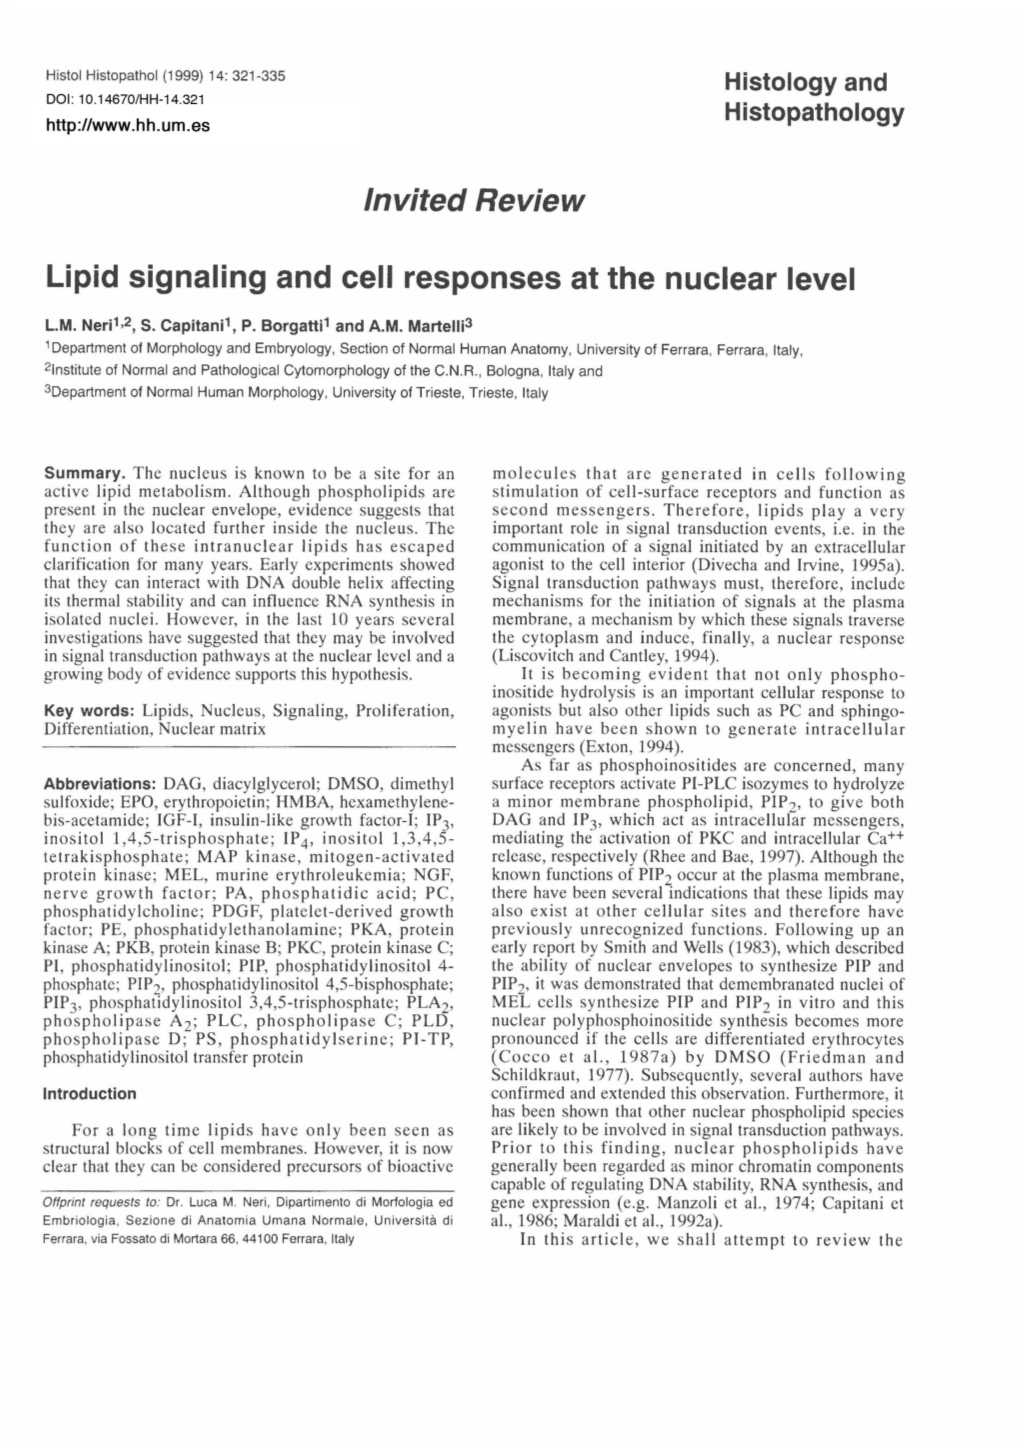 Invited Review Lipid Signaling and Cell Responses at the Nuclear Level